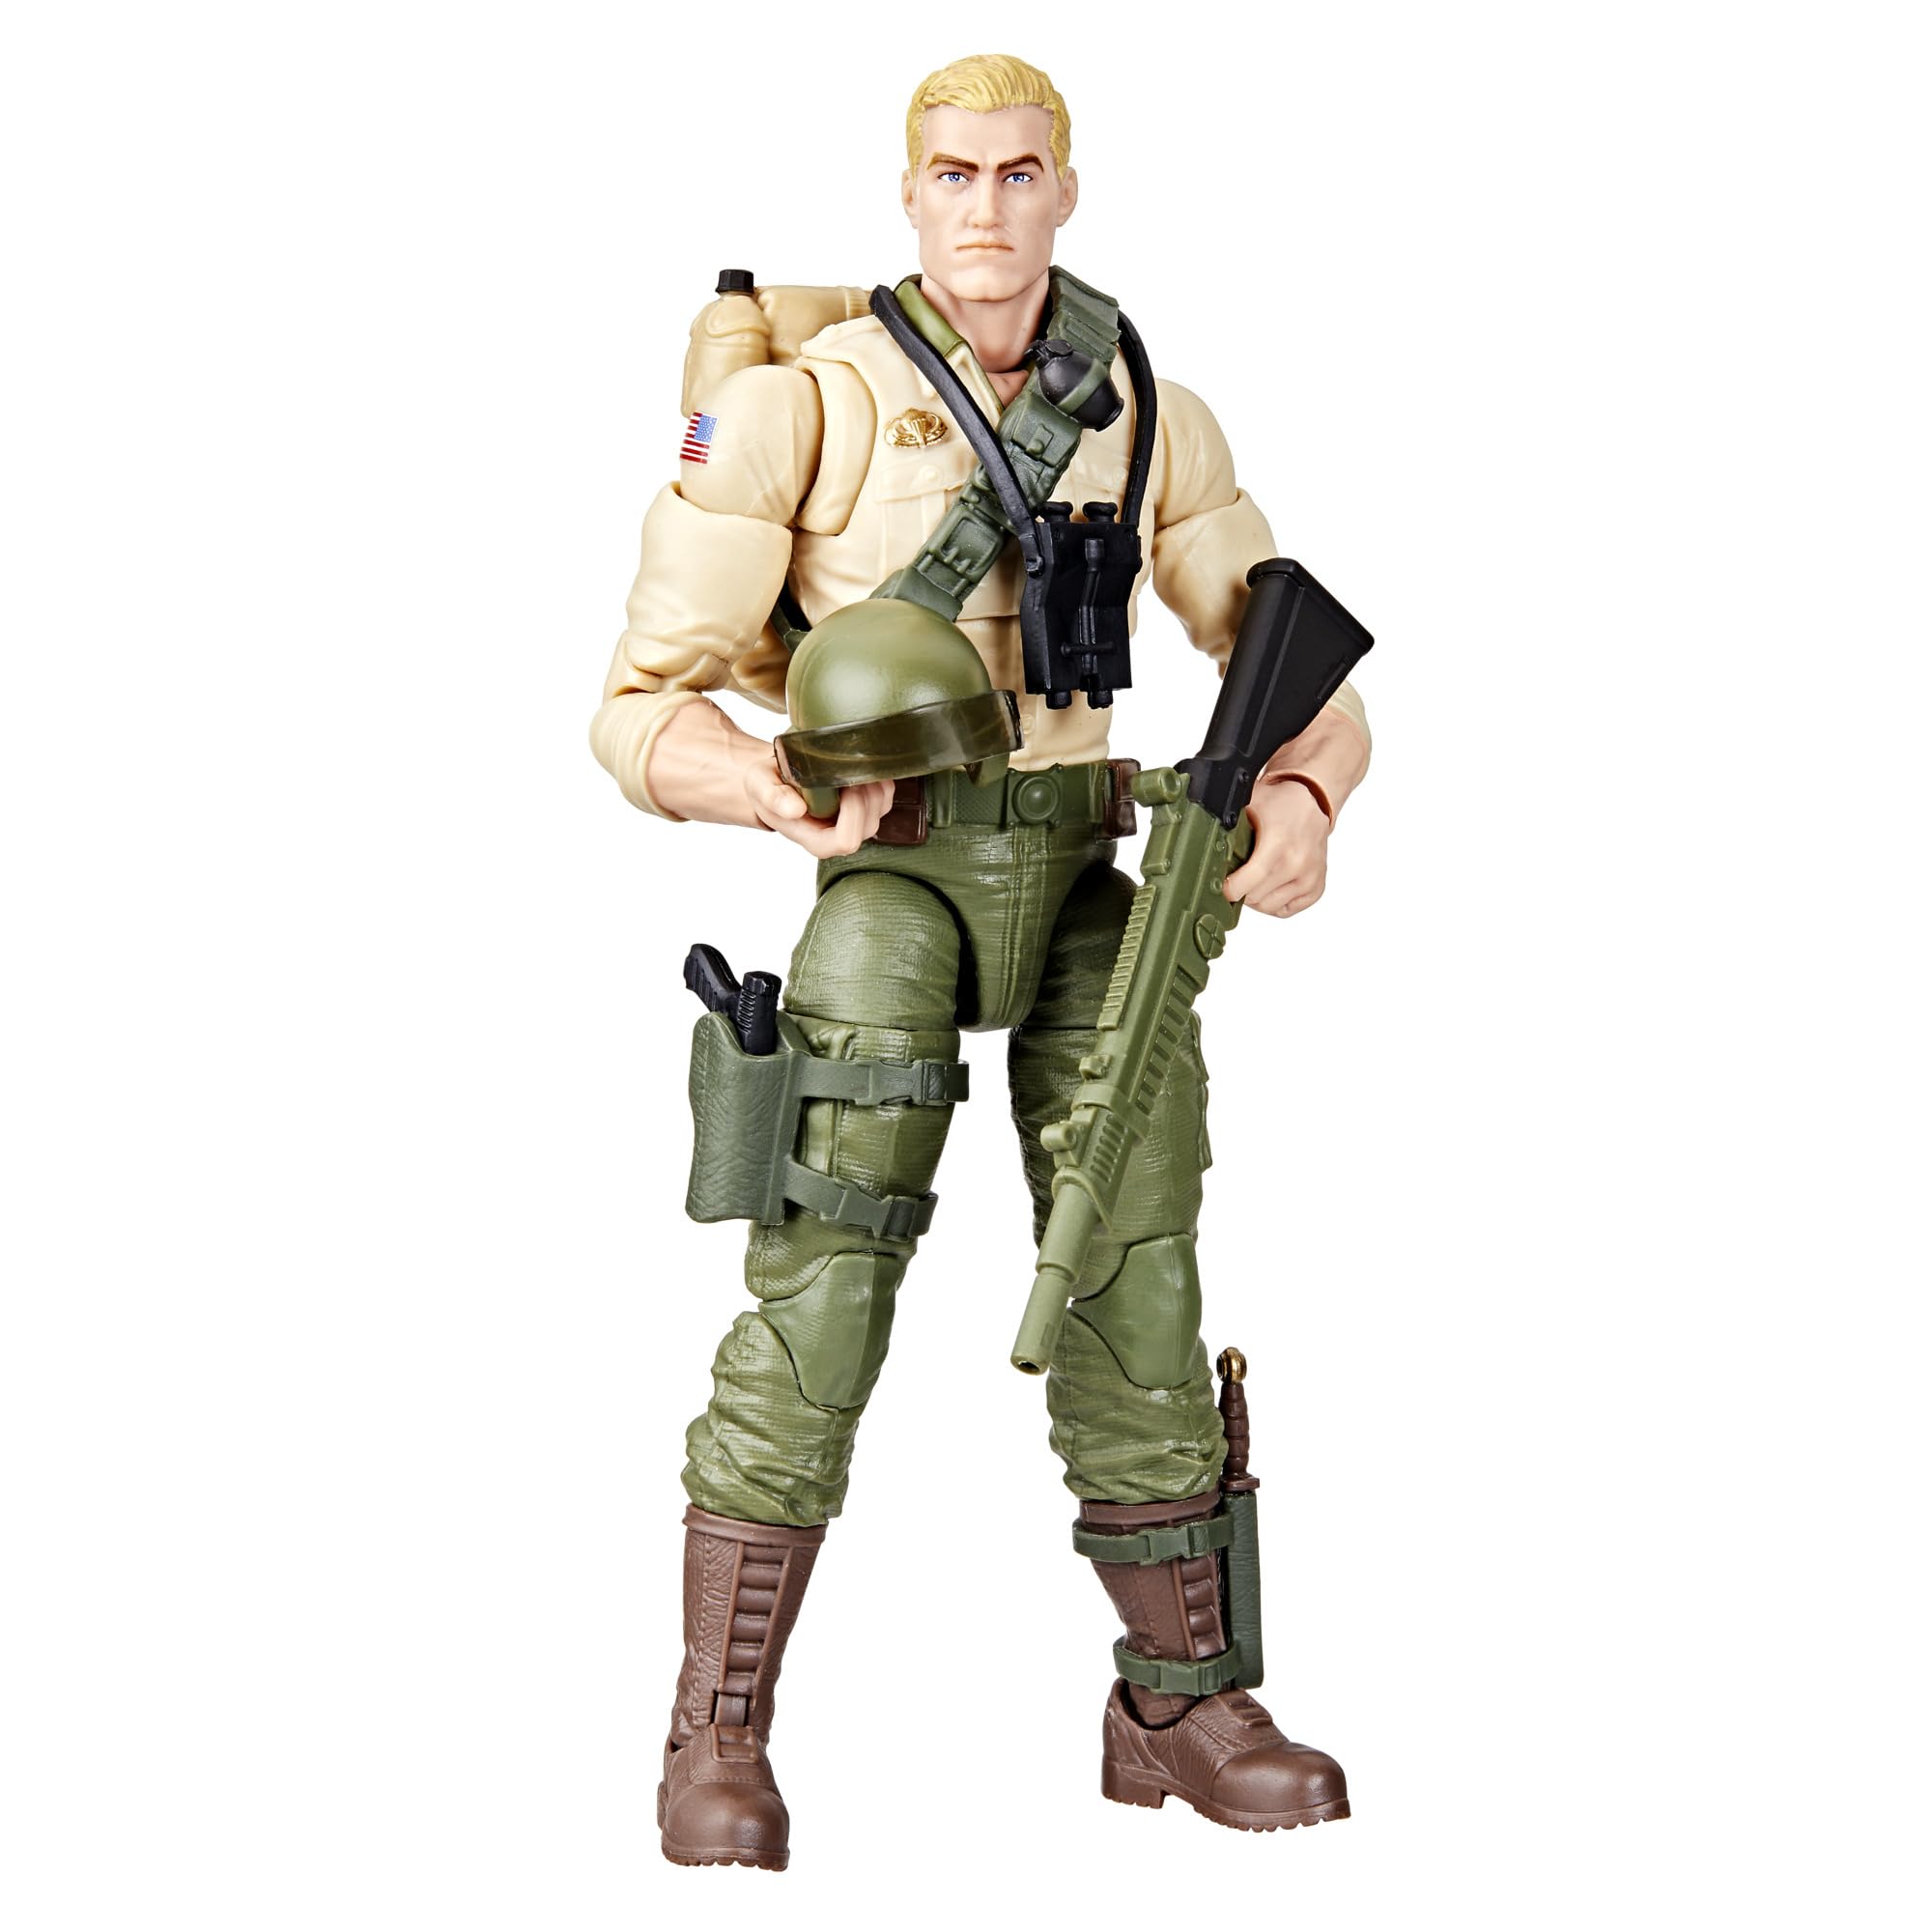 G.I. Joe Classified Series Retro Cardback Duke, Collectible 6-Inch Action Figure with 10 Accessories